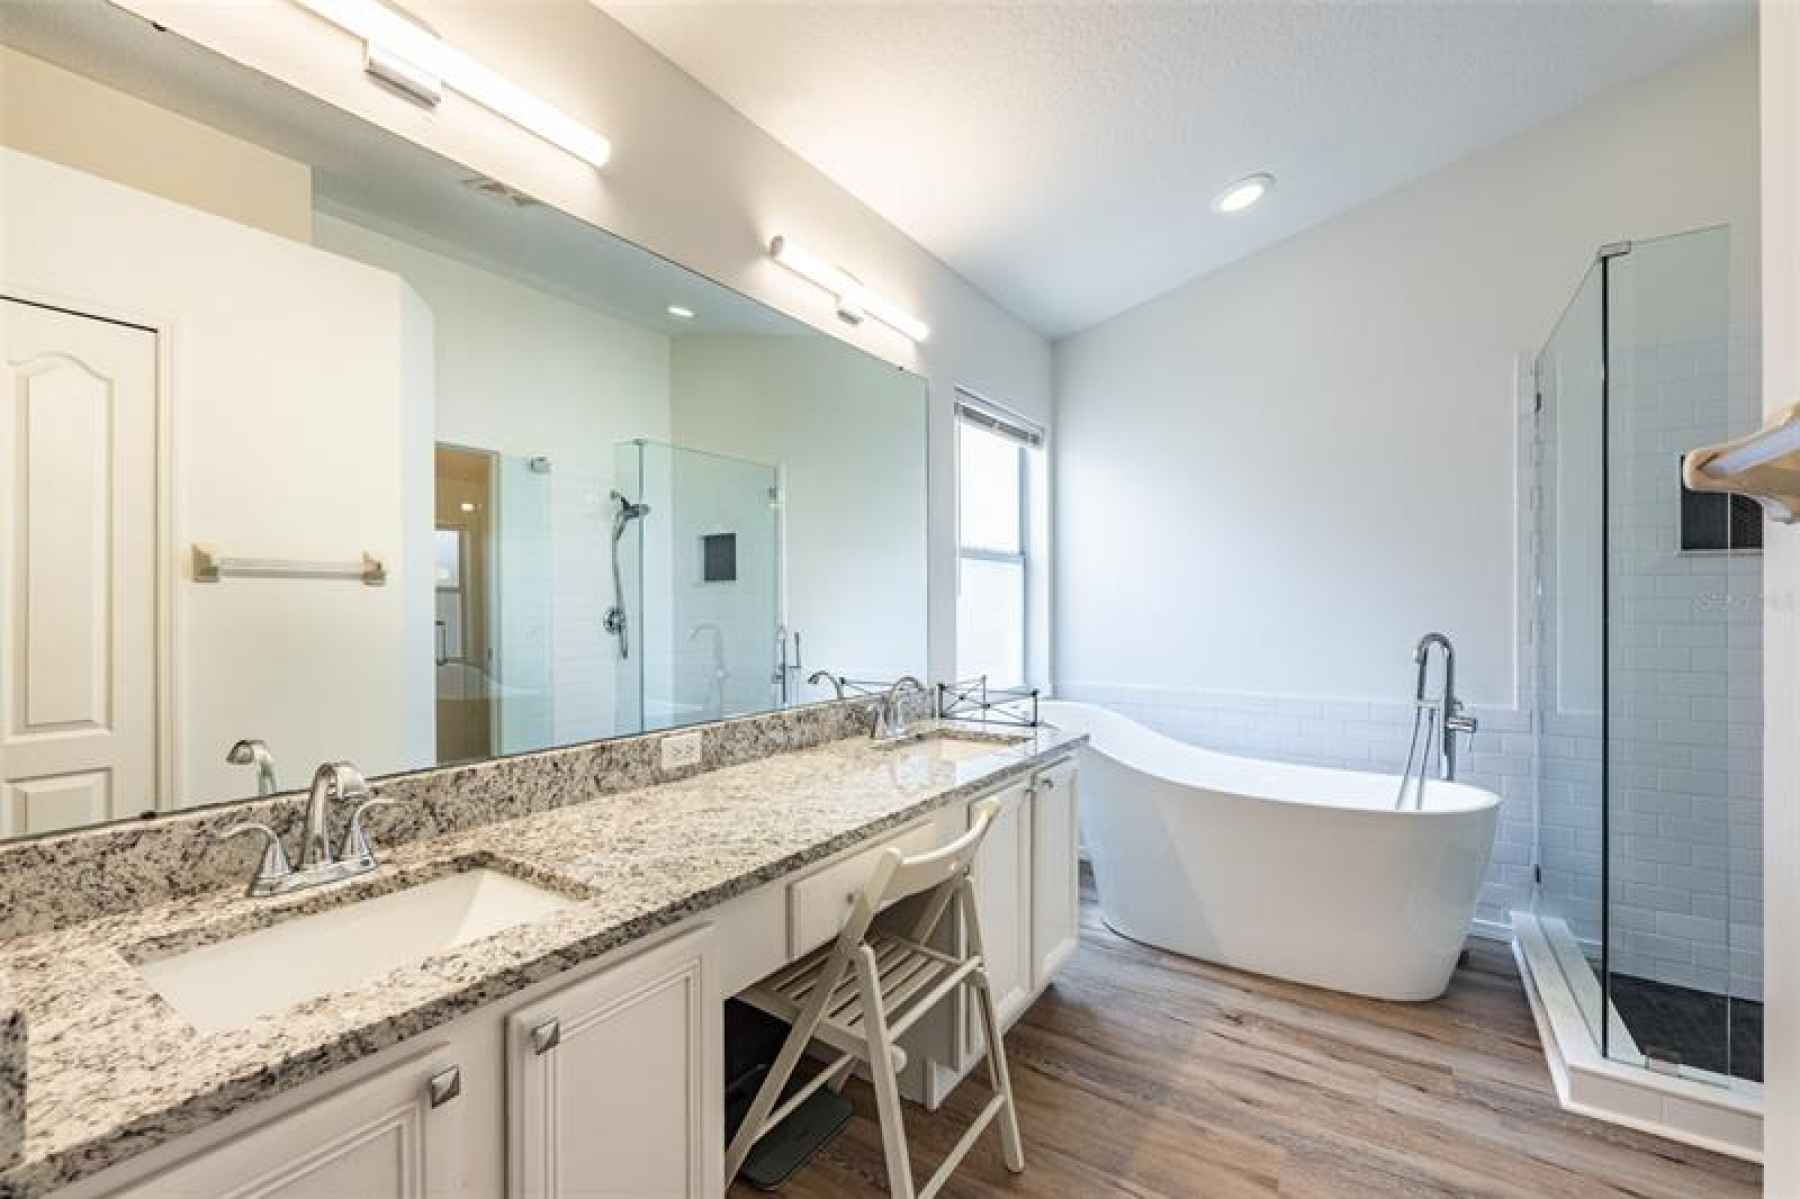 Newly remodeled master bath has granite counters with dual sinks, a soaking tub, separate shower and